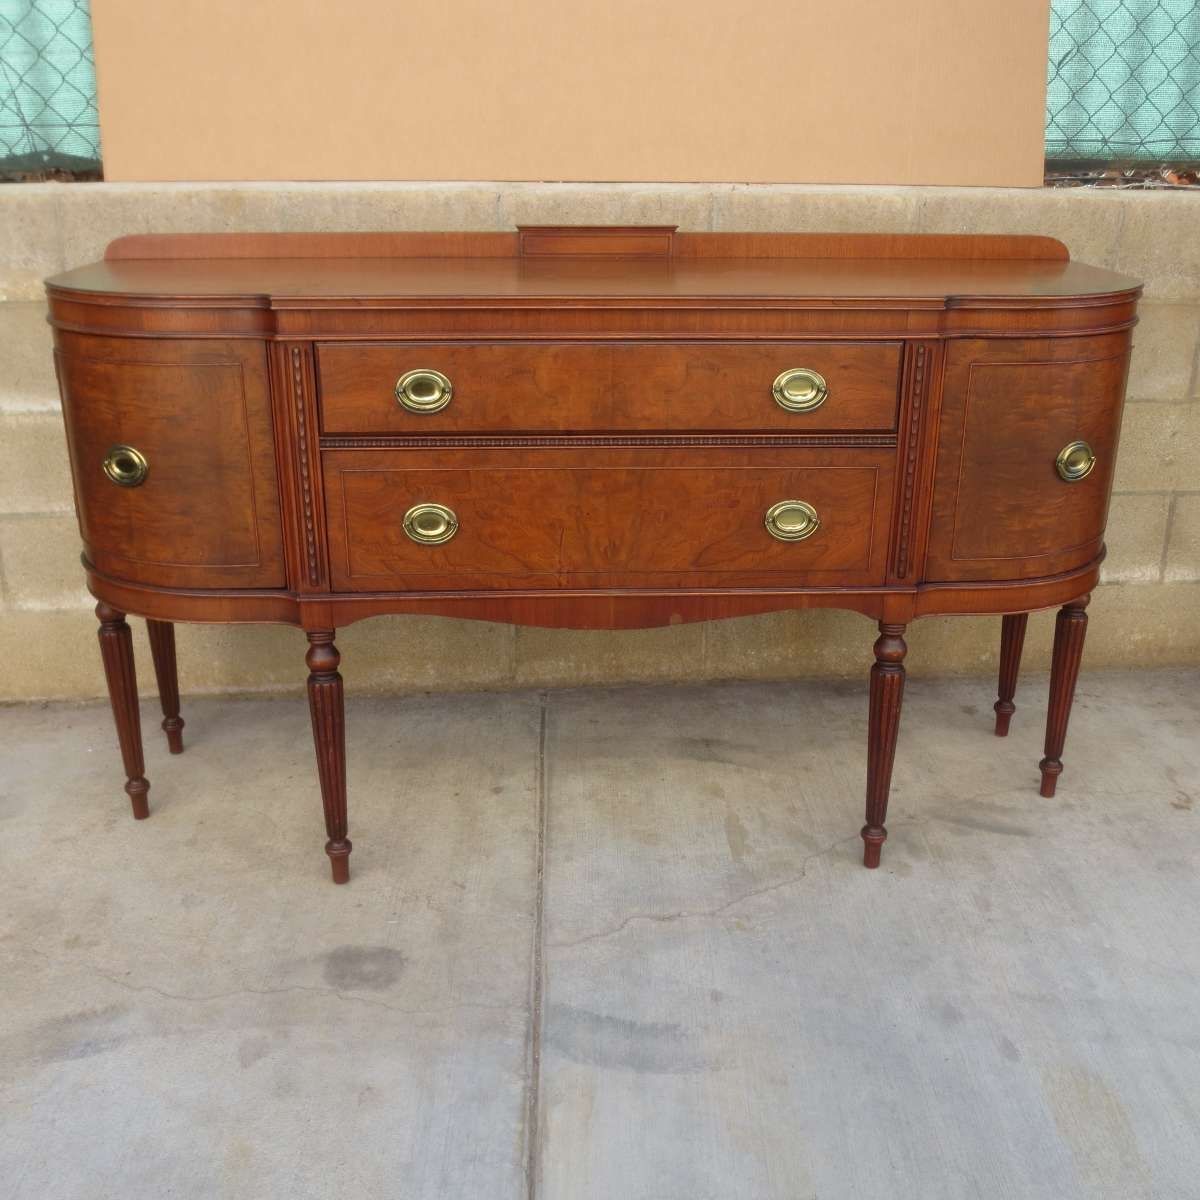 Antique Sideboards And Buffets Decor — All Furniture In Wooden Sideboards And Buffets (View 18 of 20)